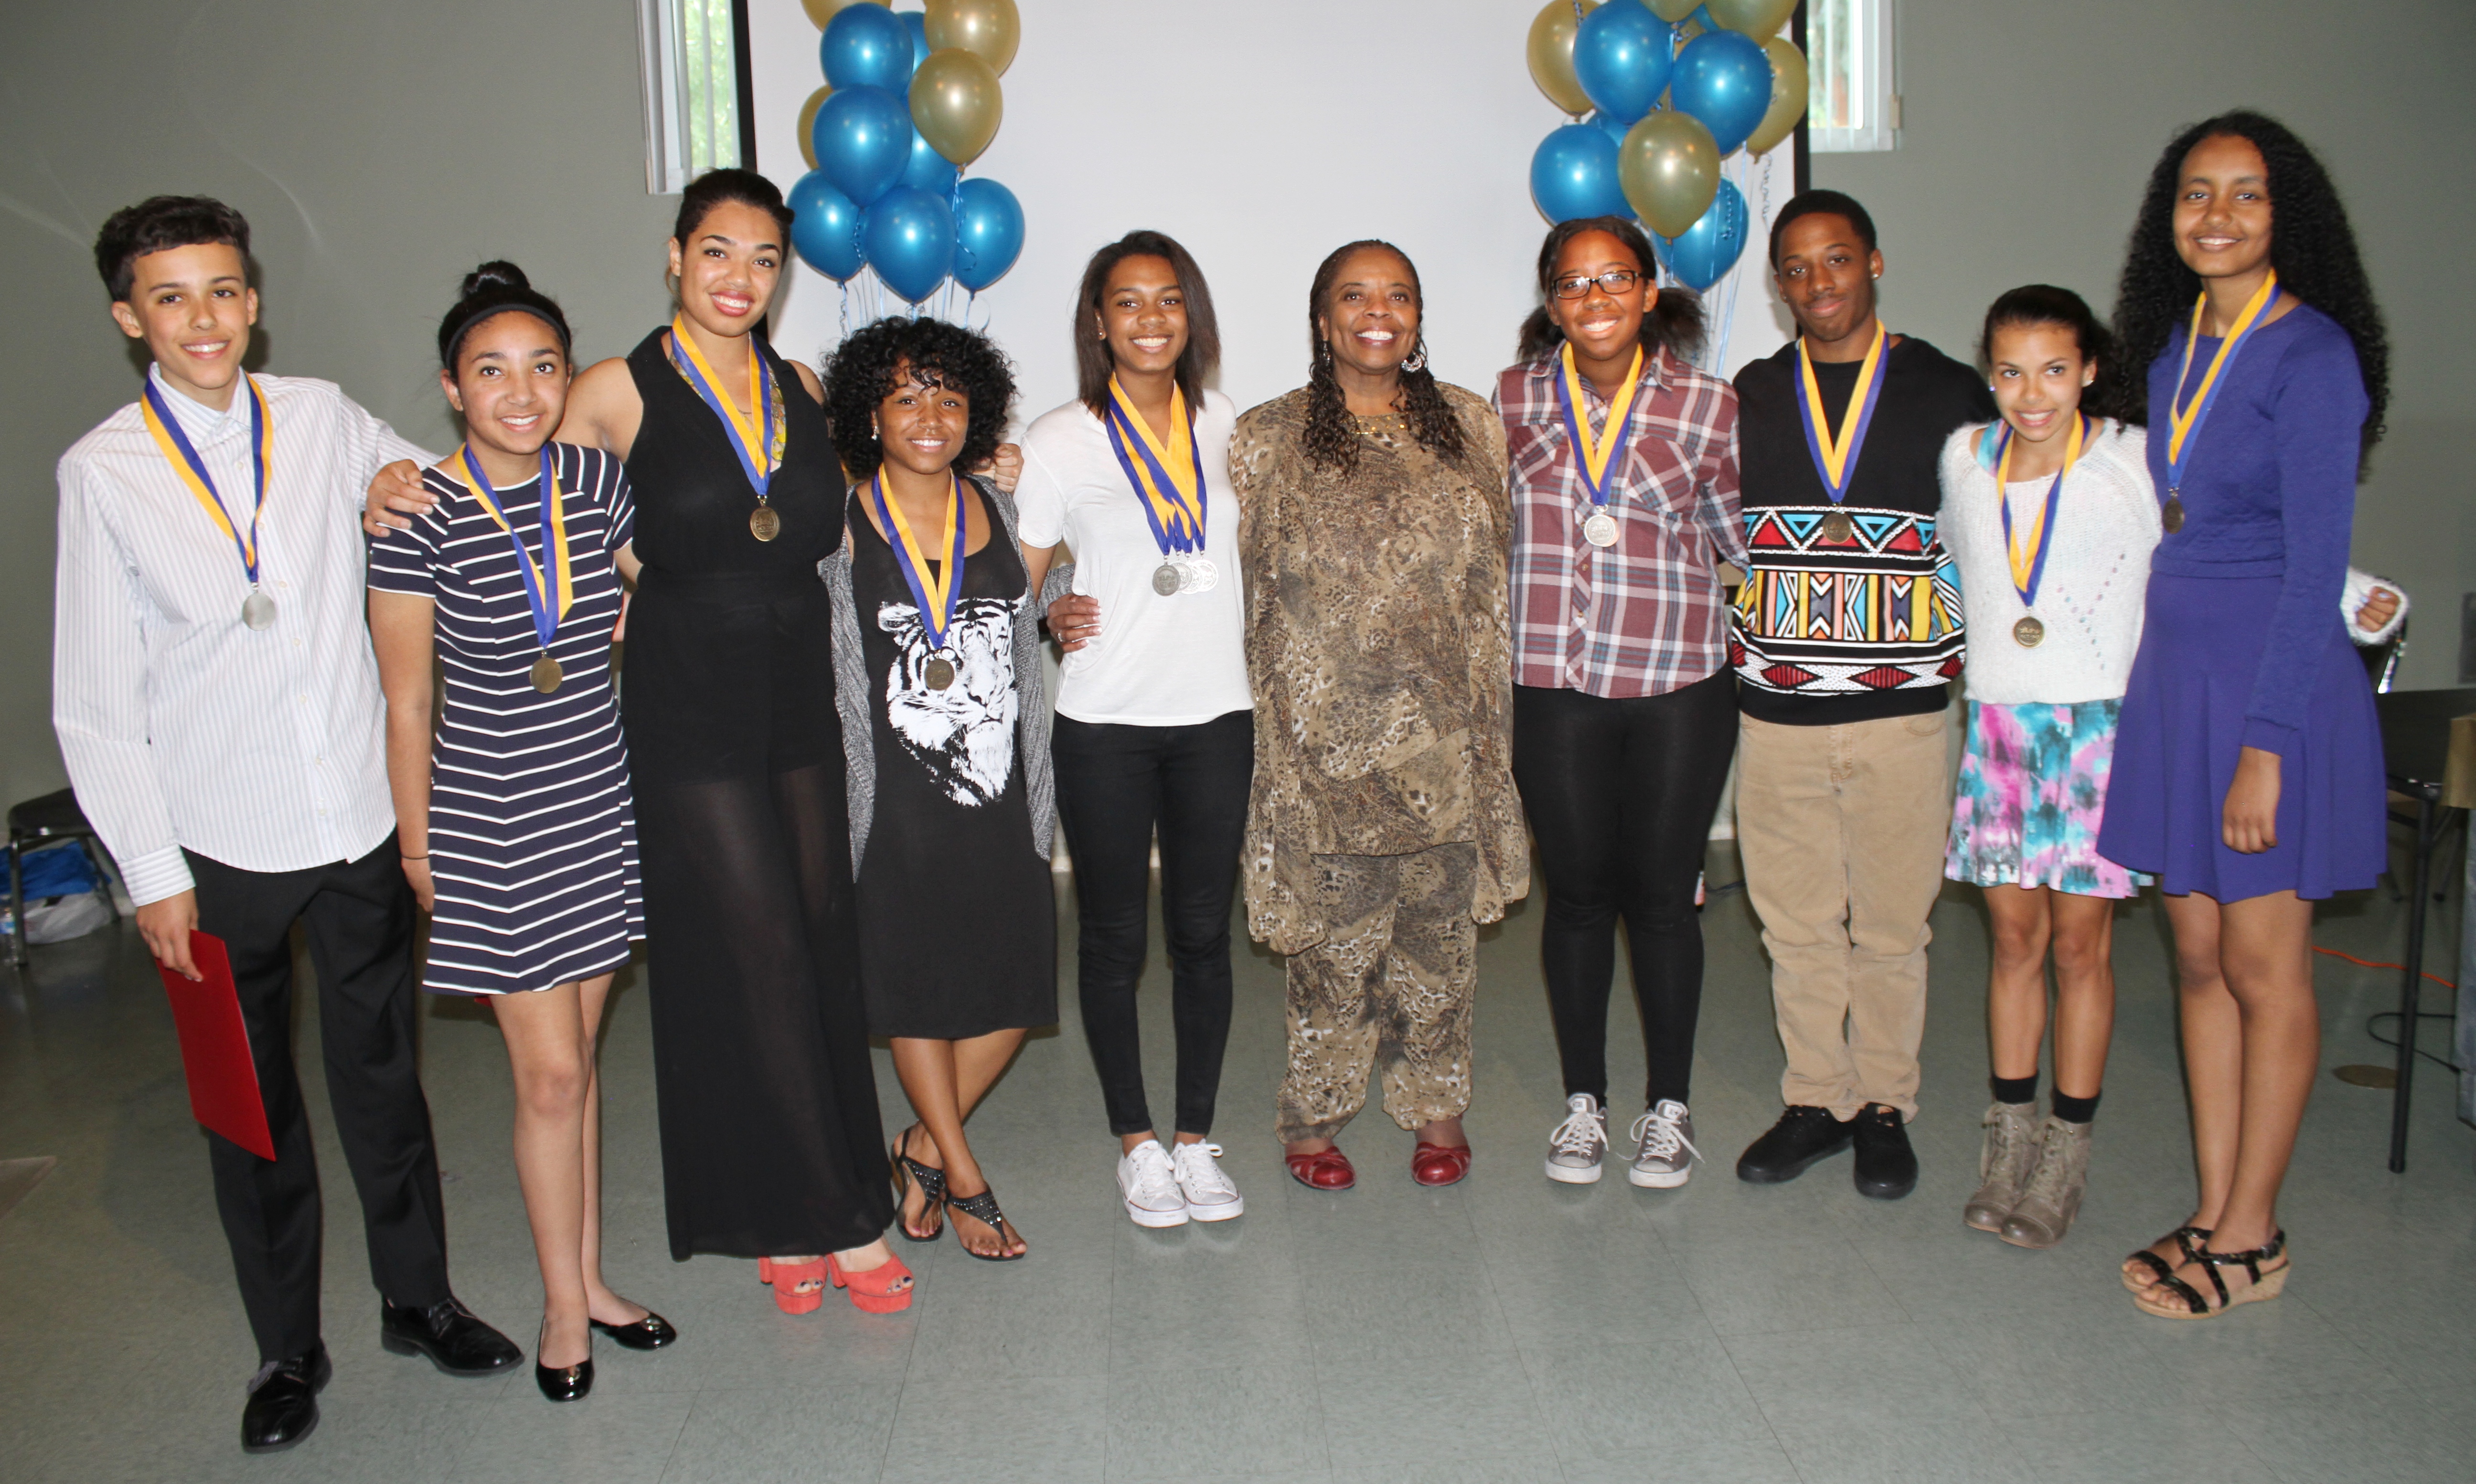 Gallery: Altadena NAACP Awards Talented Students at ACT-SO Event